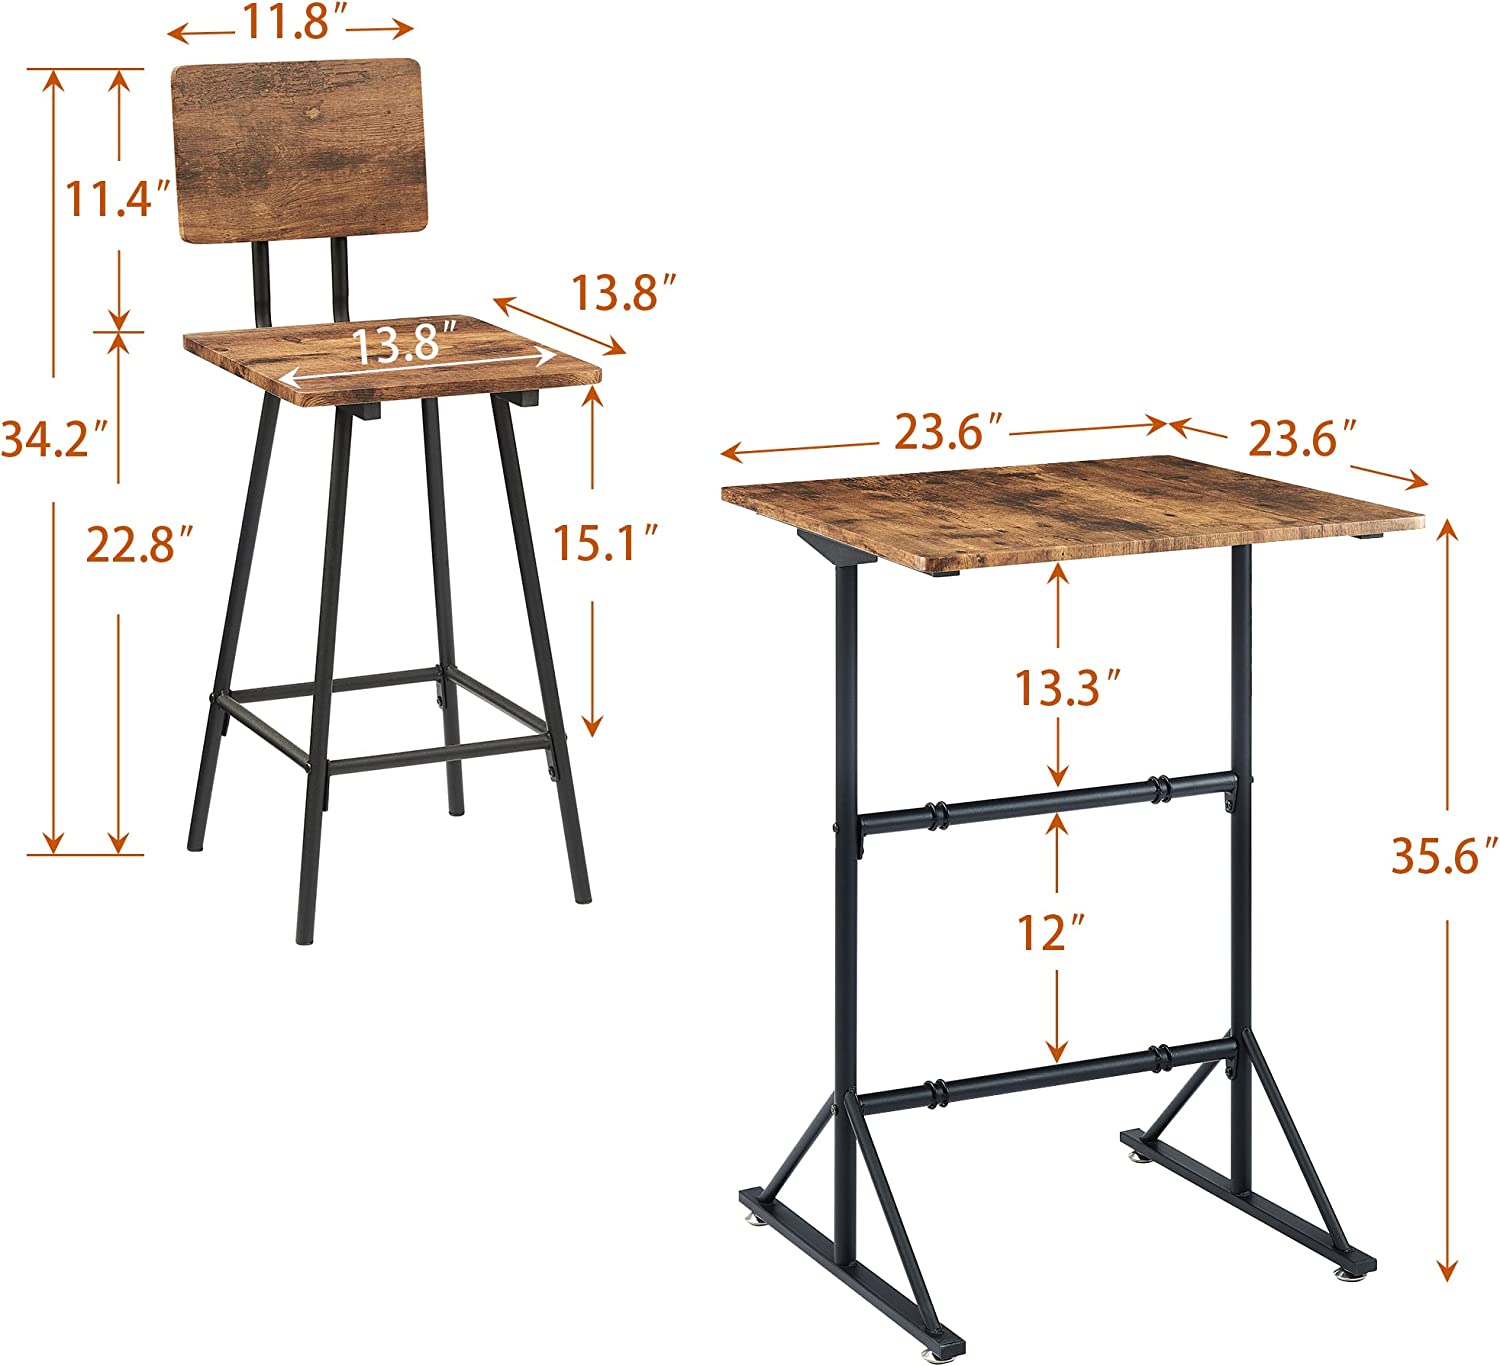 VECELO 3 Piece Bar Table Set, Wood Rectangle Counter Height Dinette with 2 Bistro Stools